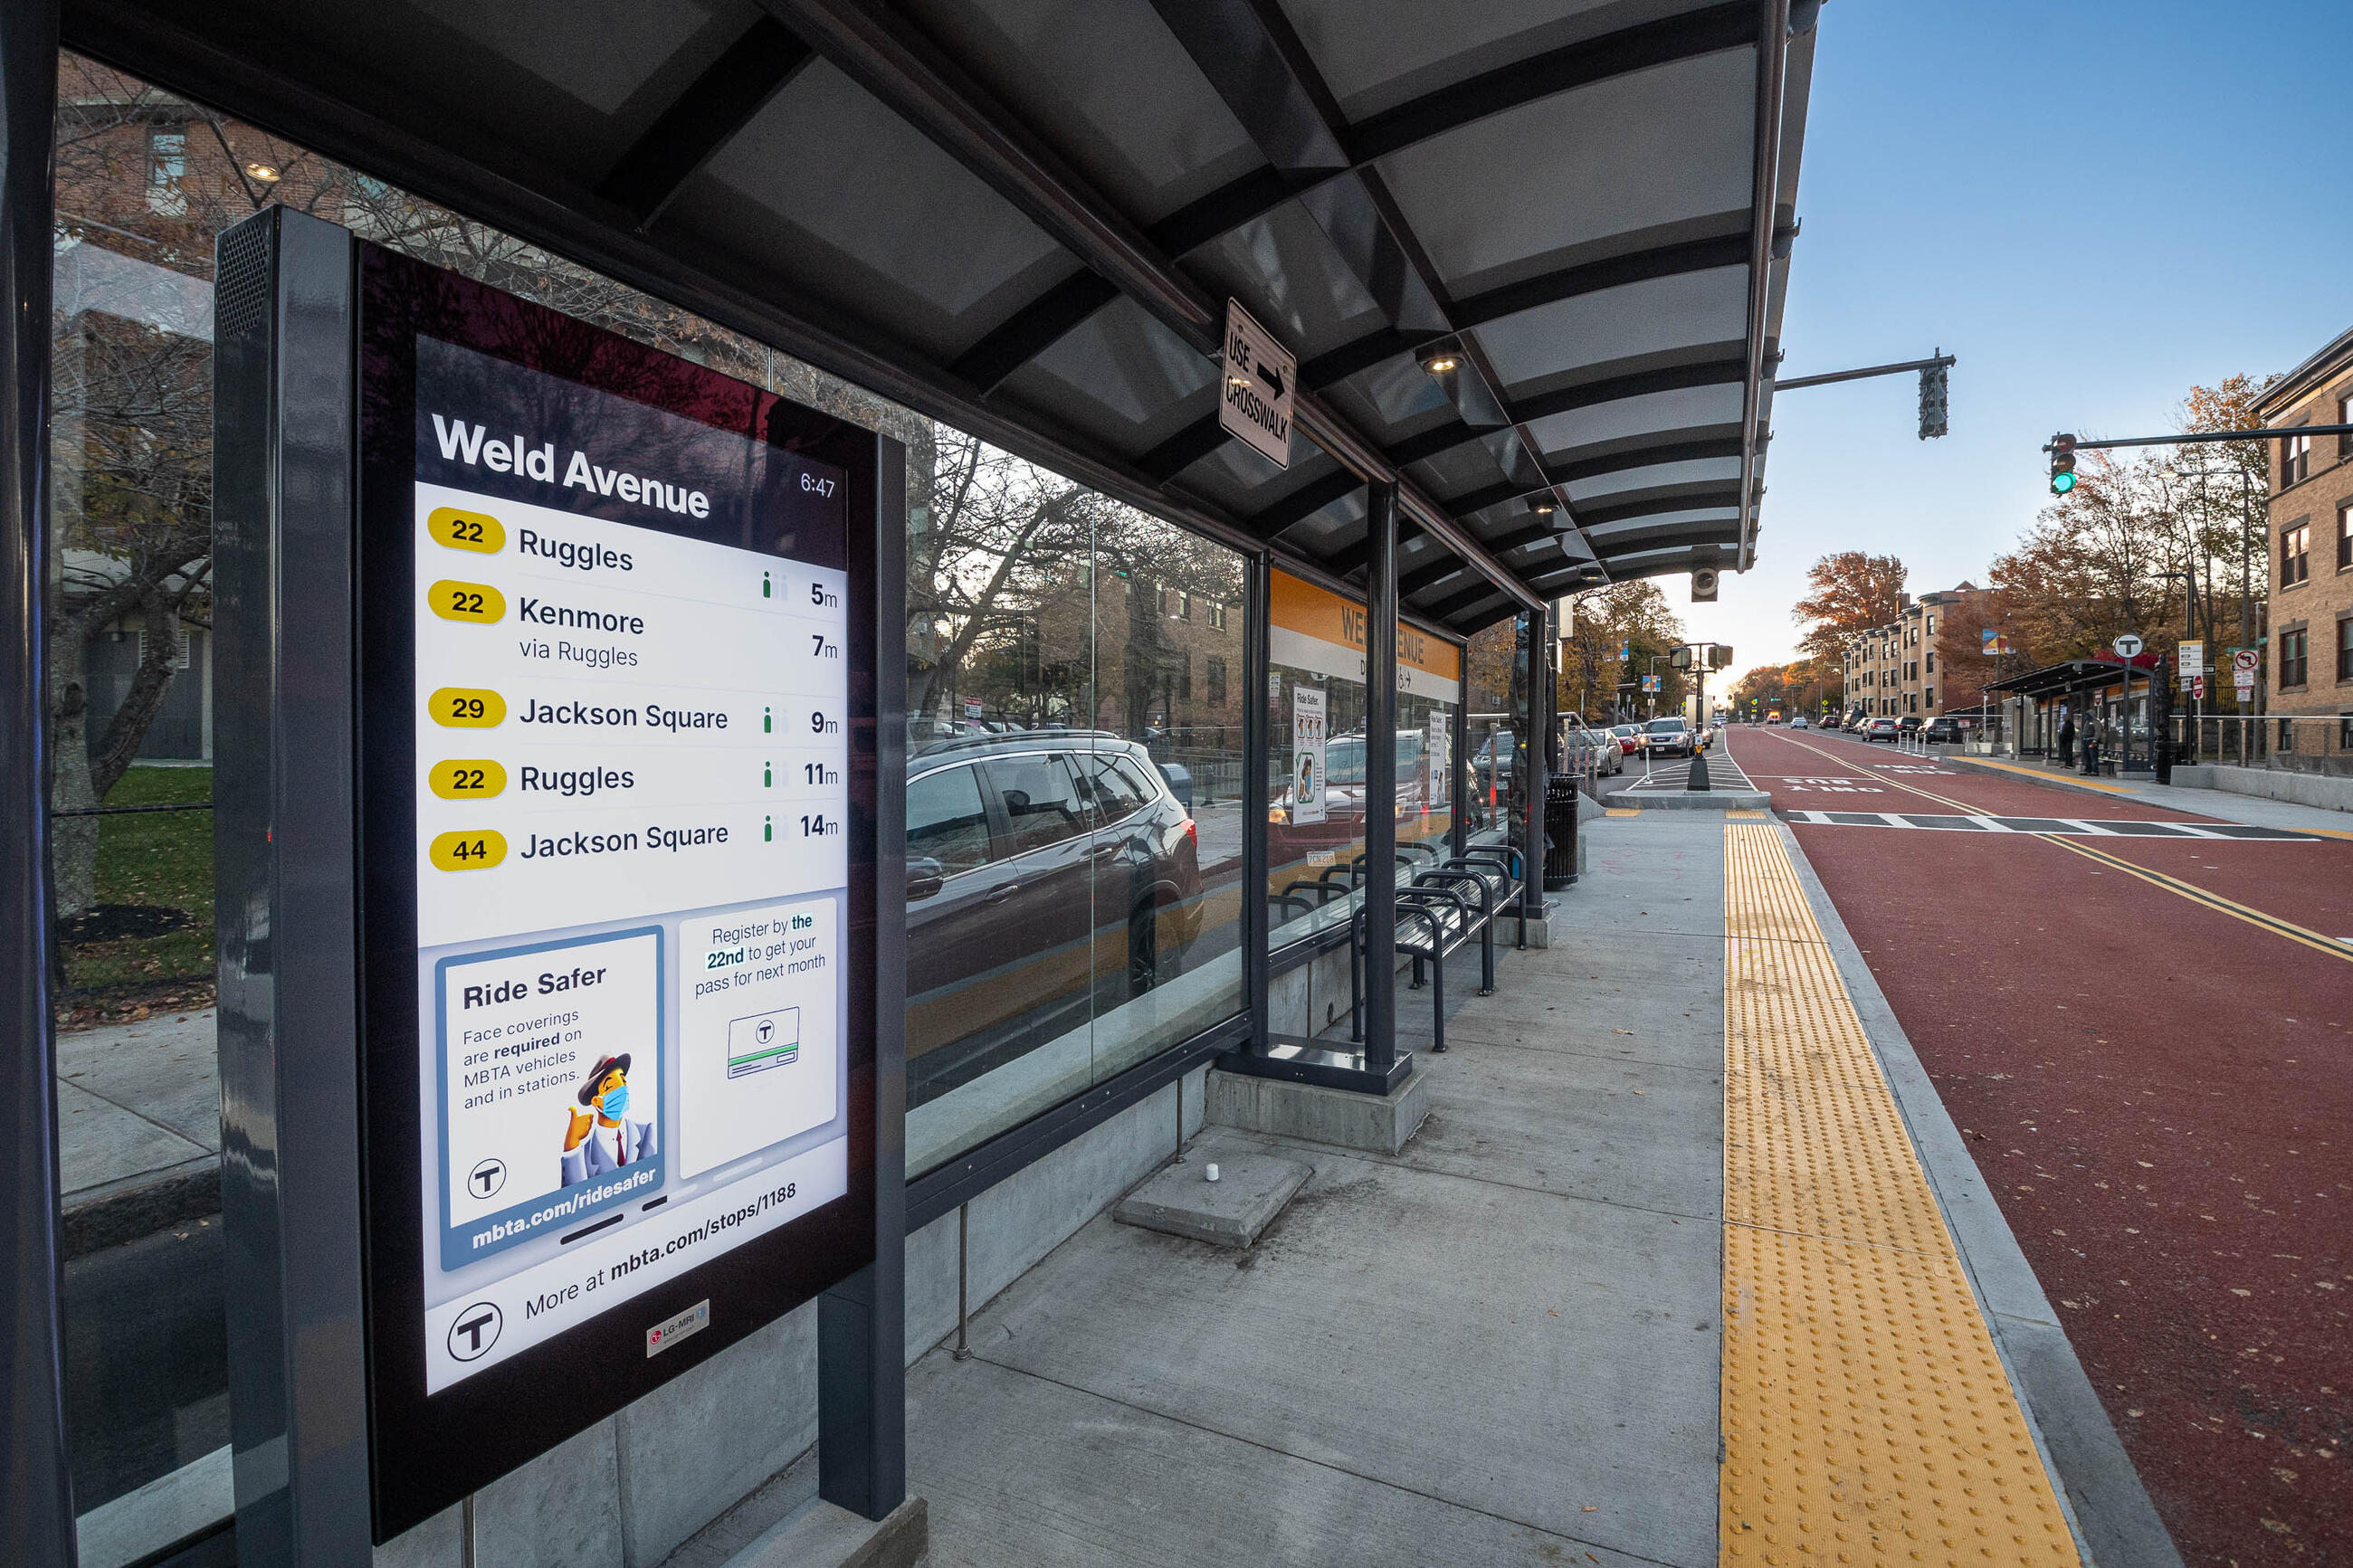 The Columbus Avenue boarding platforms feature seating, canopies, and important accessibility improvements like large digital panels dedicated to real-time information that also include an audio component.